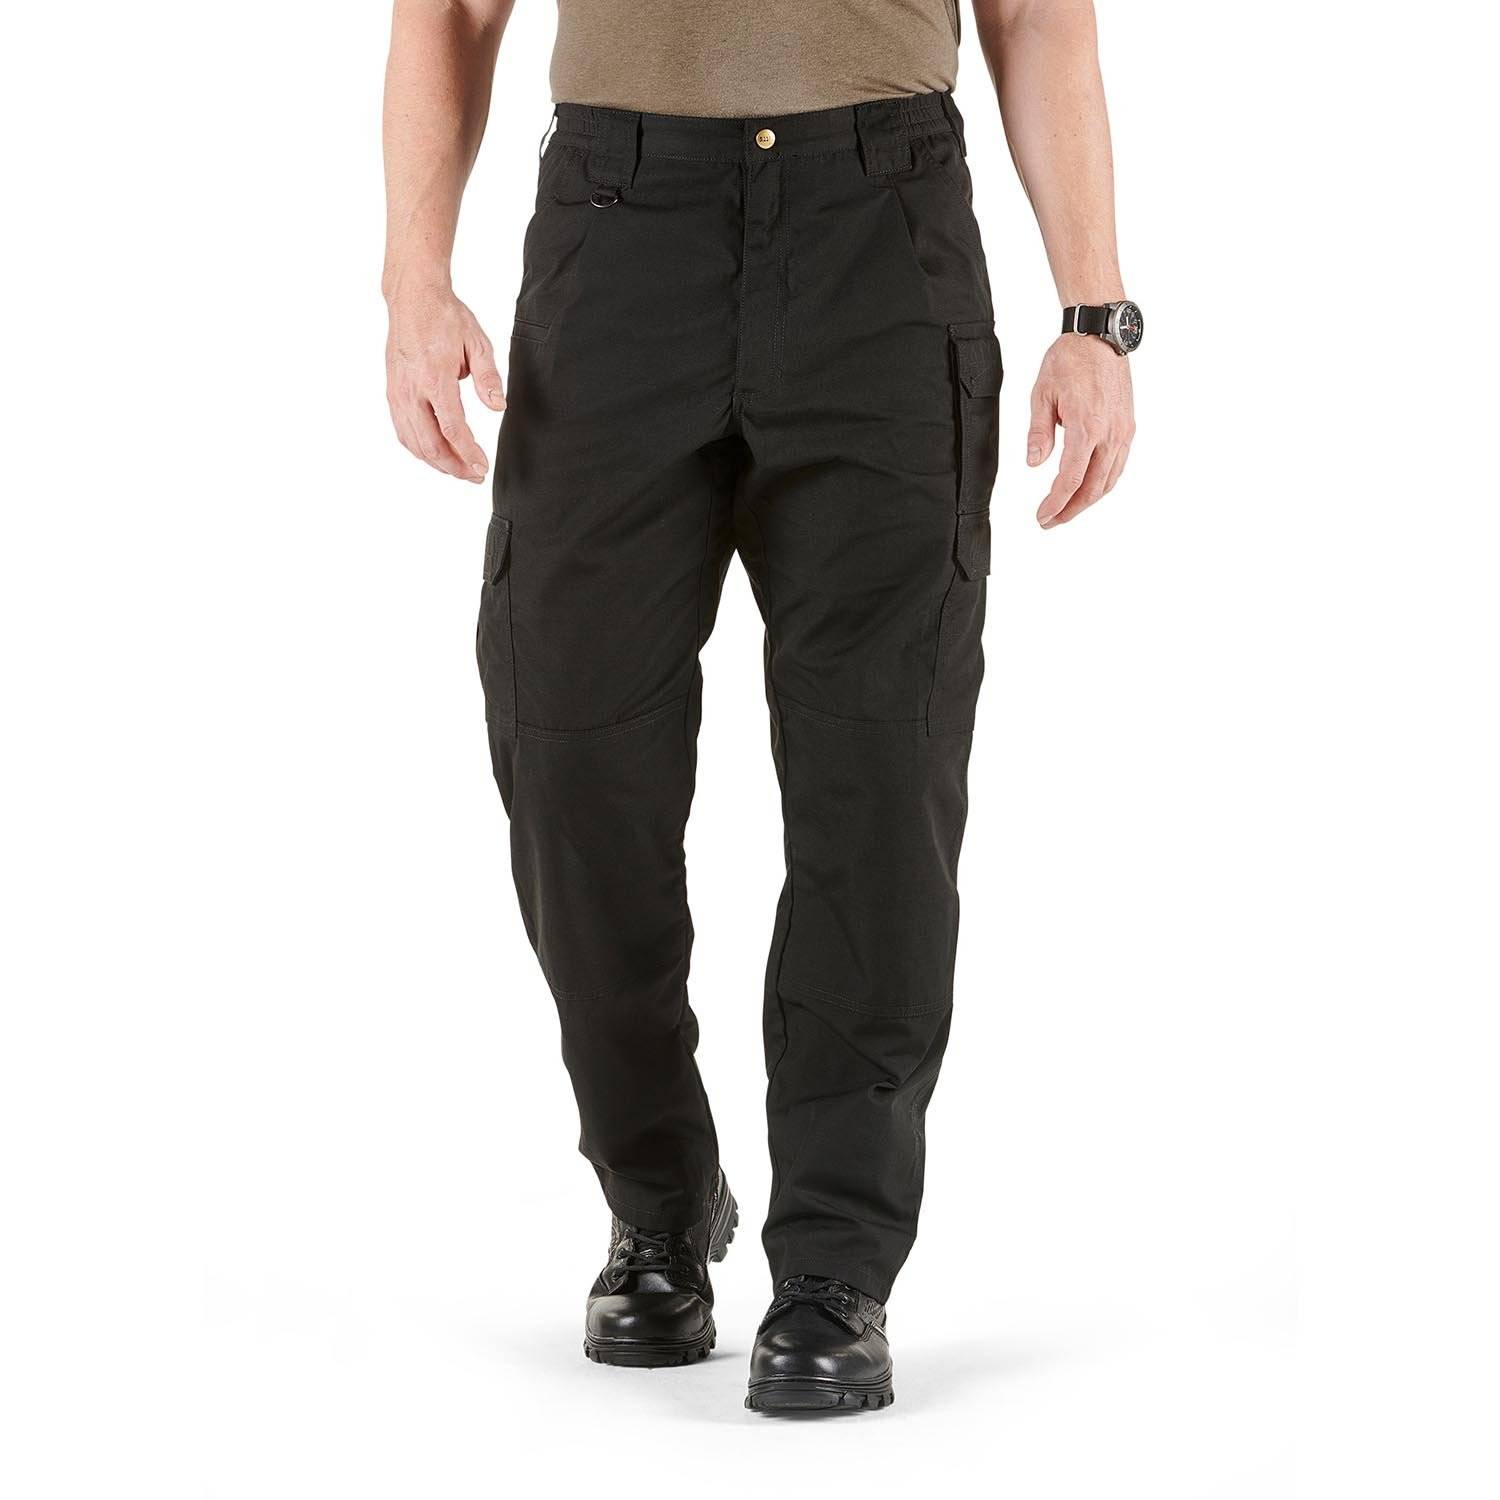  FEDTOSING Tactical Pants for Men with 9 Pockets Cotton